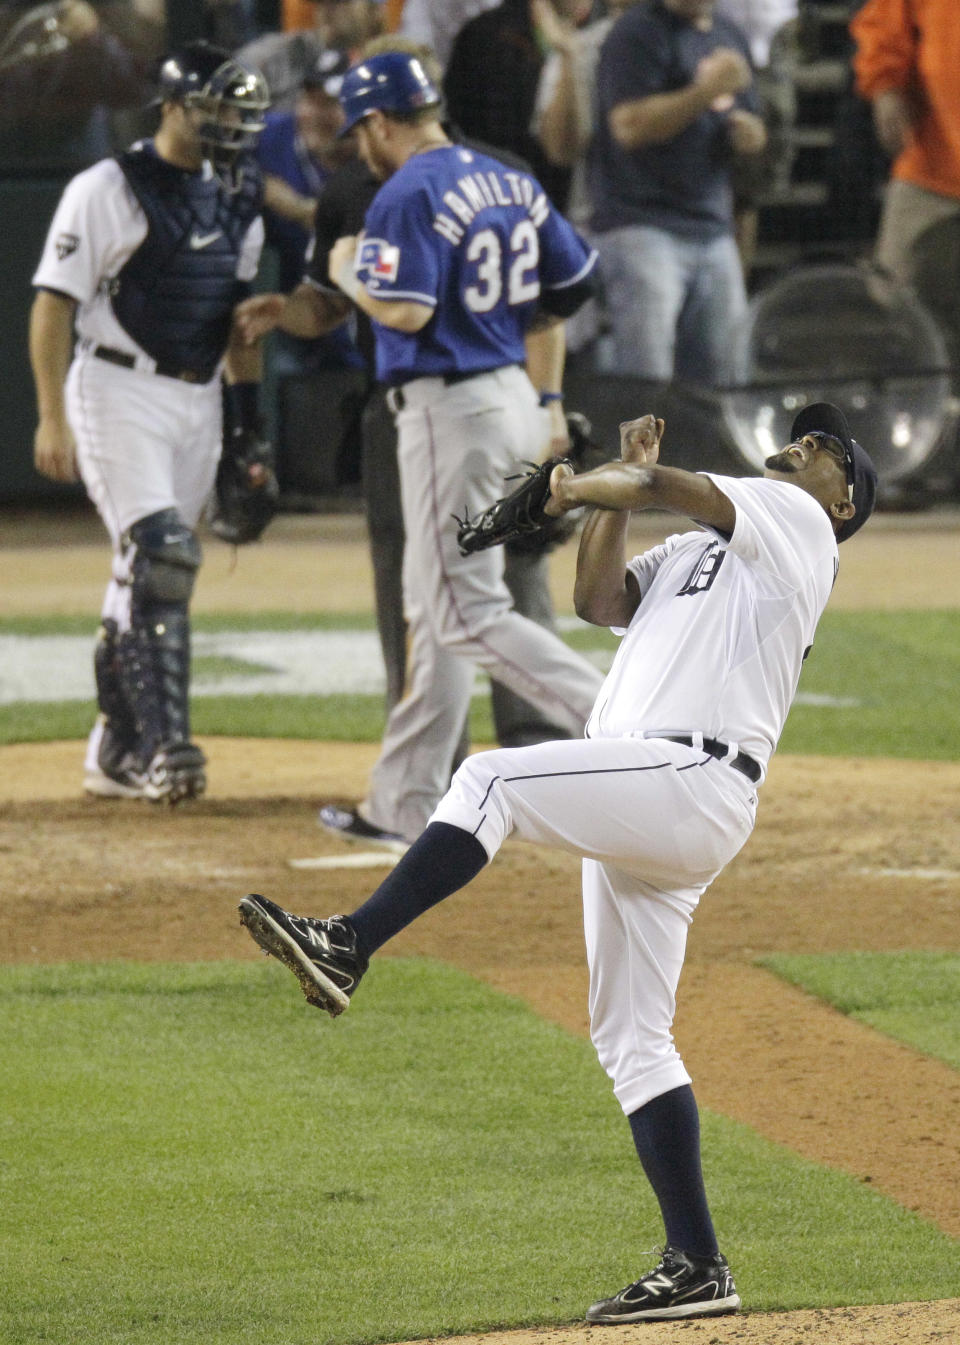 Detroit Tigers relief pitcher Jose Valverde reacts after the third out in the ninth inning of Game 3 in baseball's American League championship series against the Texas Rangers, Tuesday, Oct. 11, 2011, in Detroit. (AP Photo/Mark Duncan)